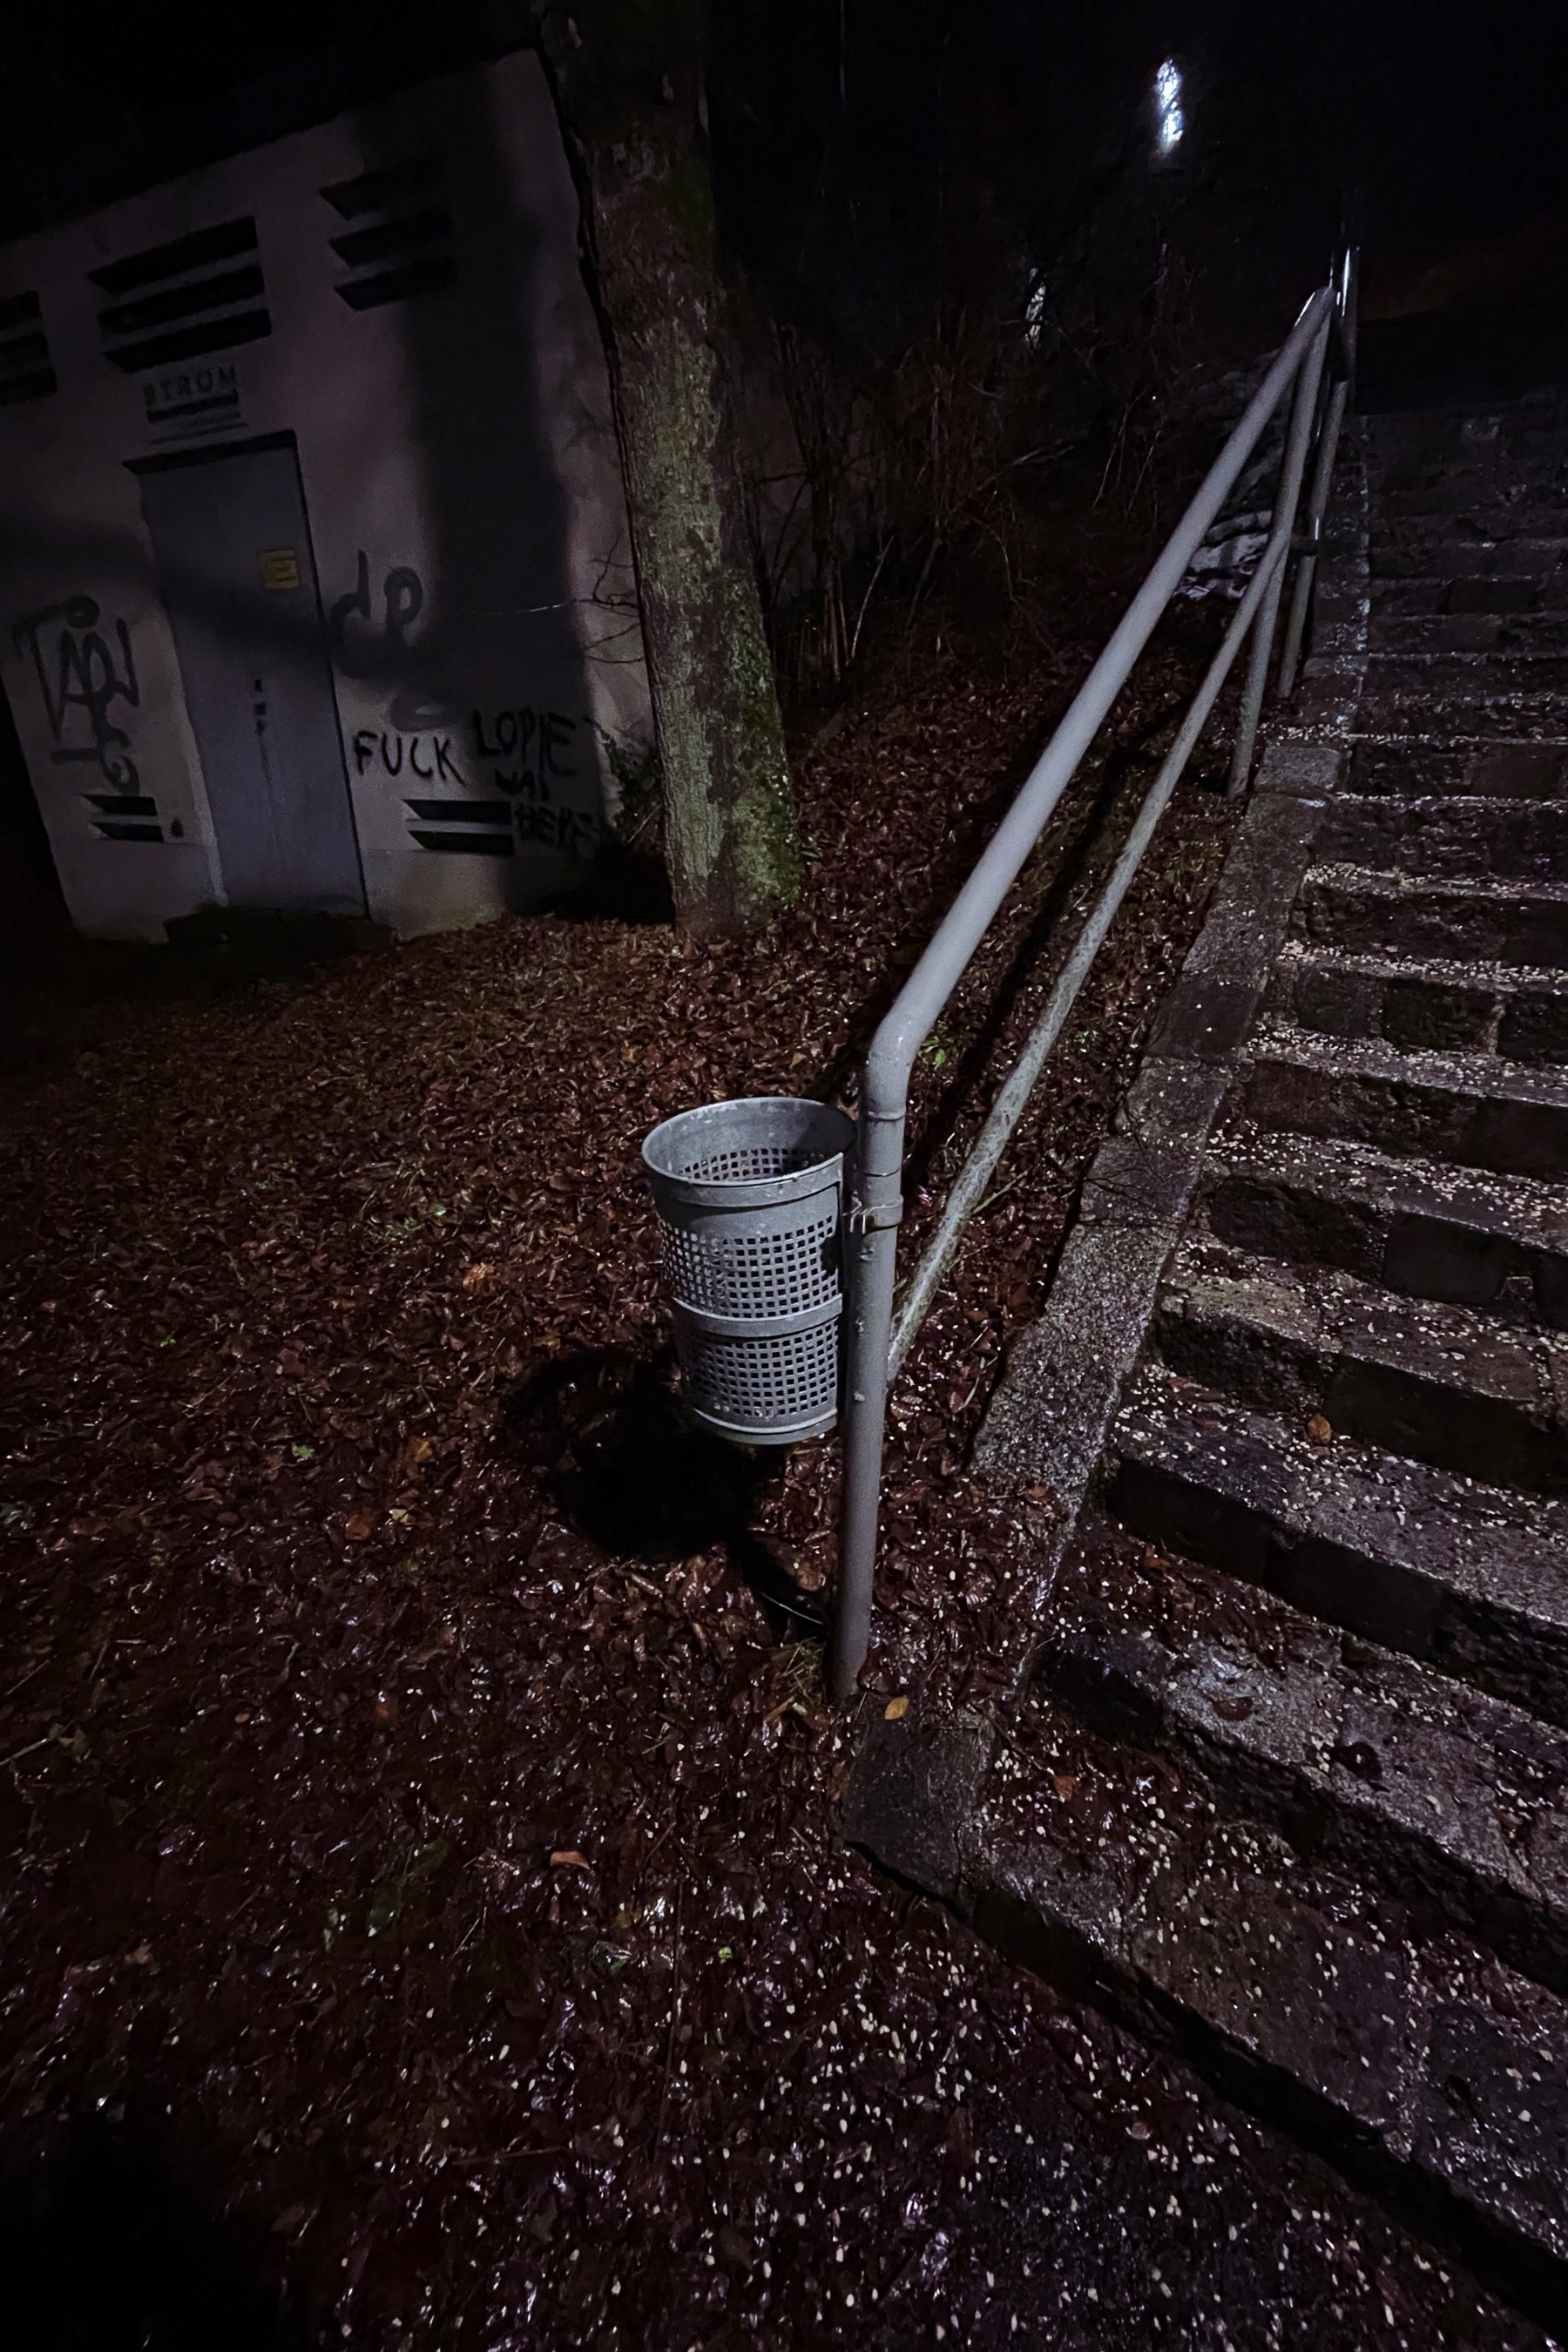 trash can fixed to the railing if a stair, illuminated by a street light. in the background there is a concrete building with graffiti 